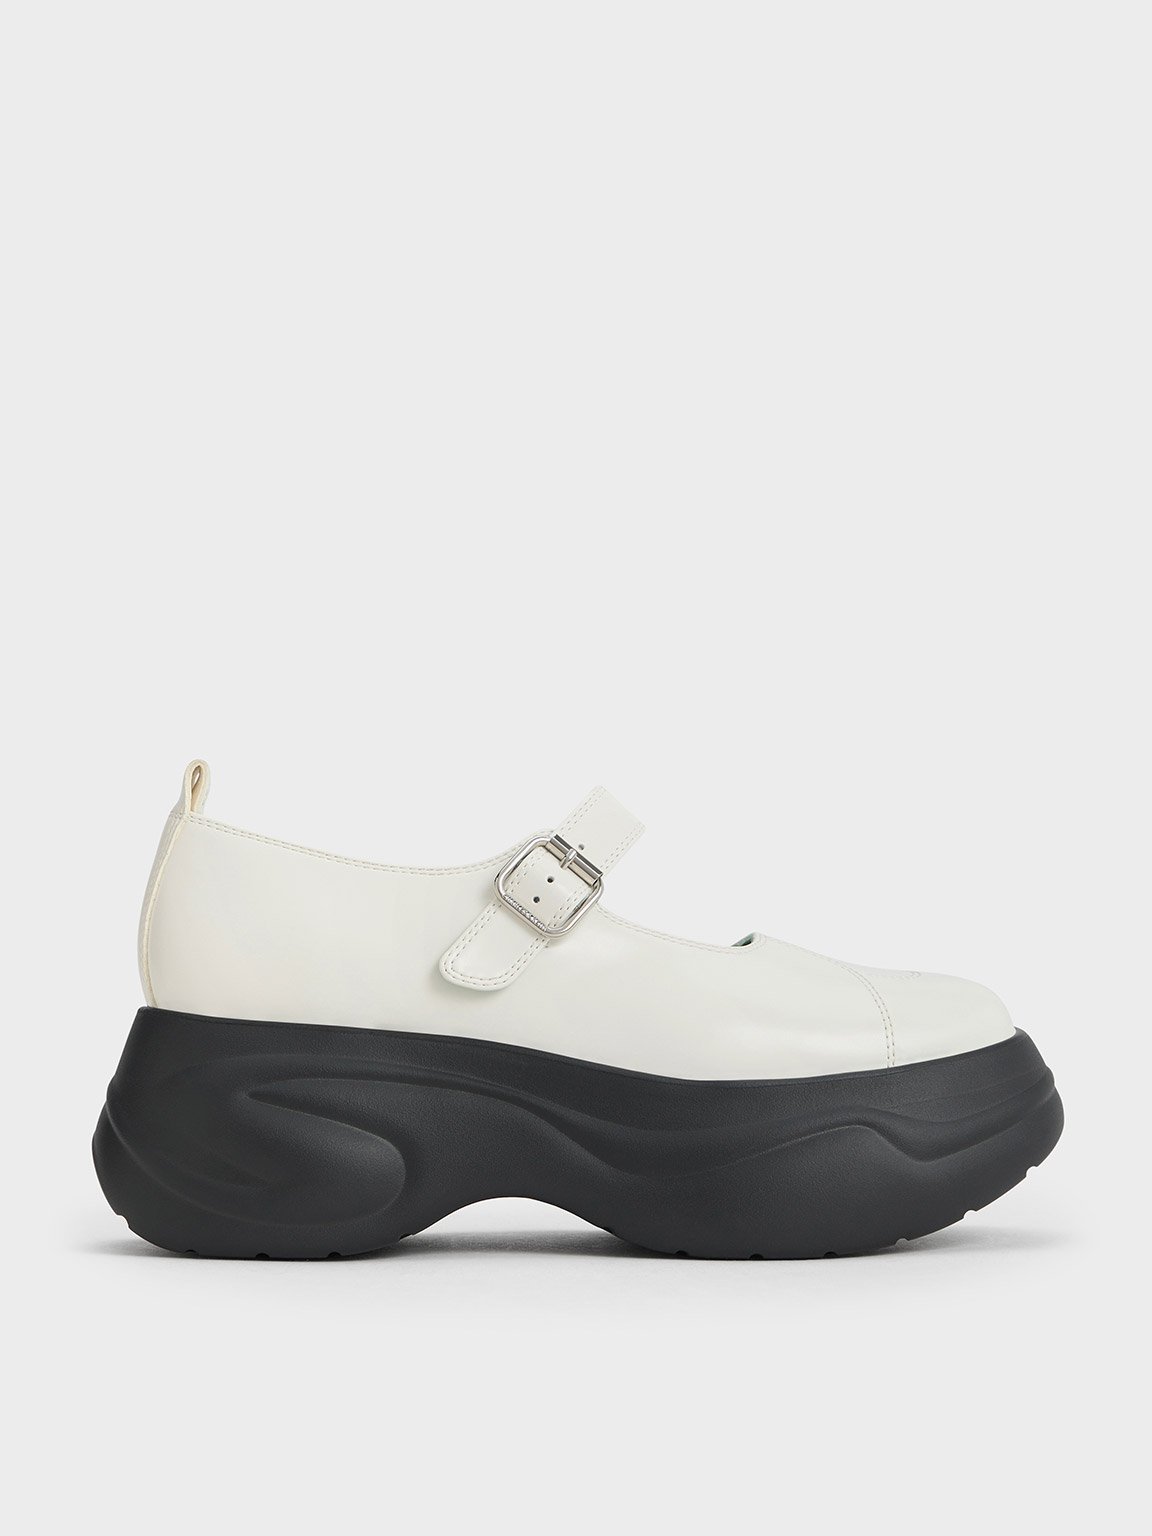 Charles & Keith Curved Platform Mary Janes In Chalk